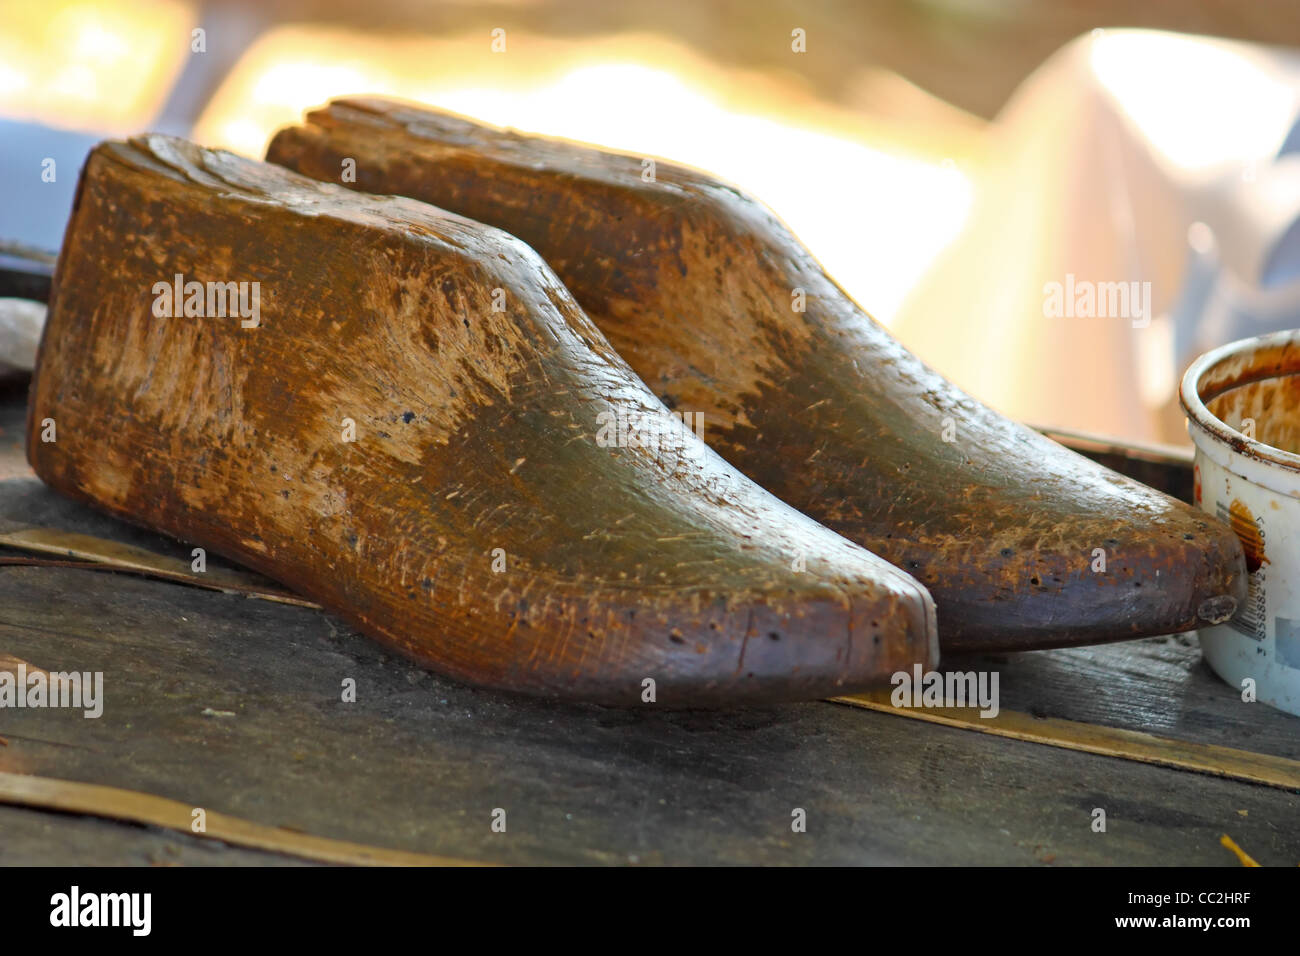 Shoemakers wooden mold for shoes, wooden form Stock Photo